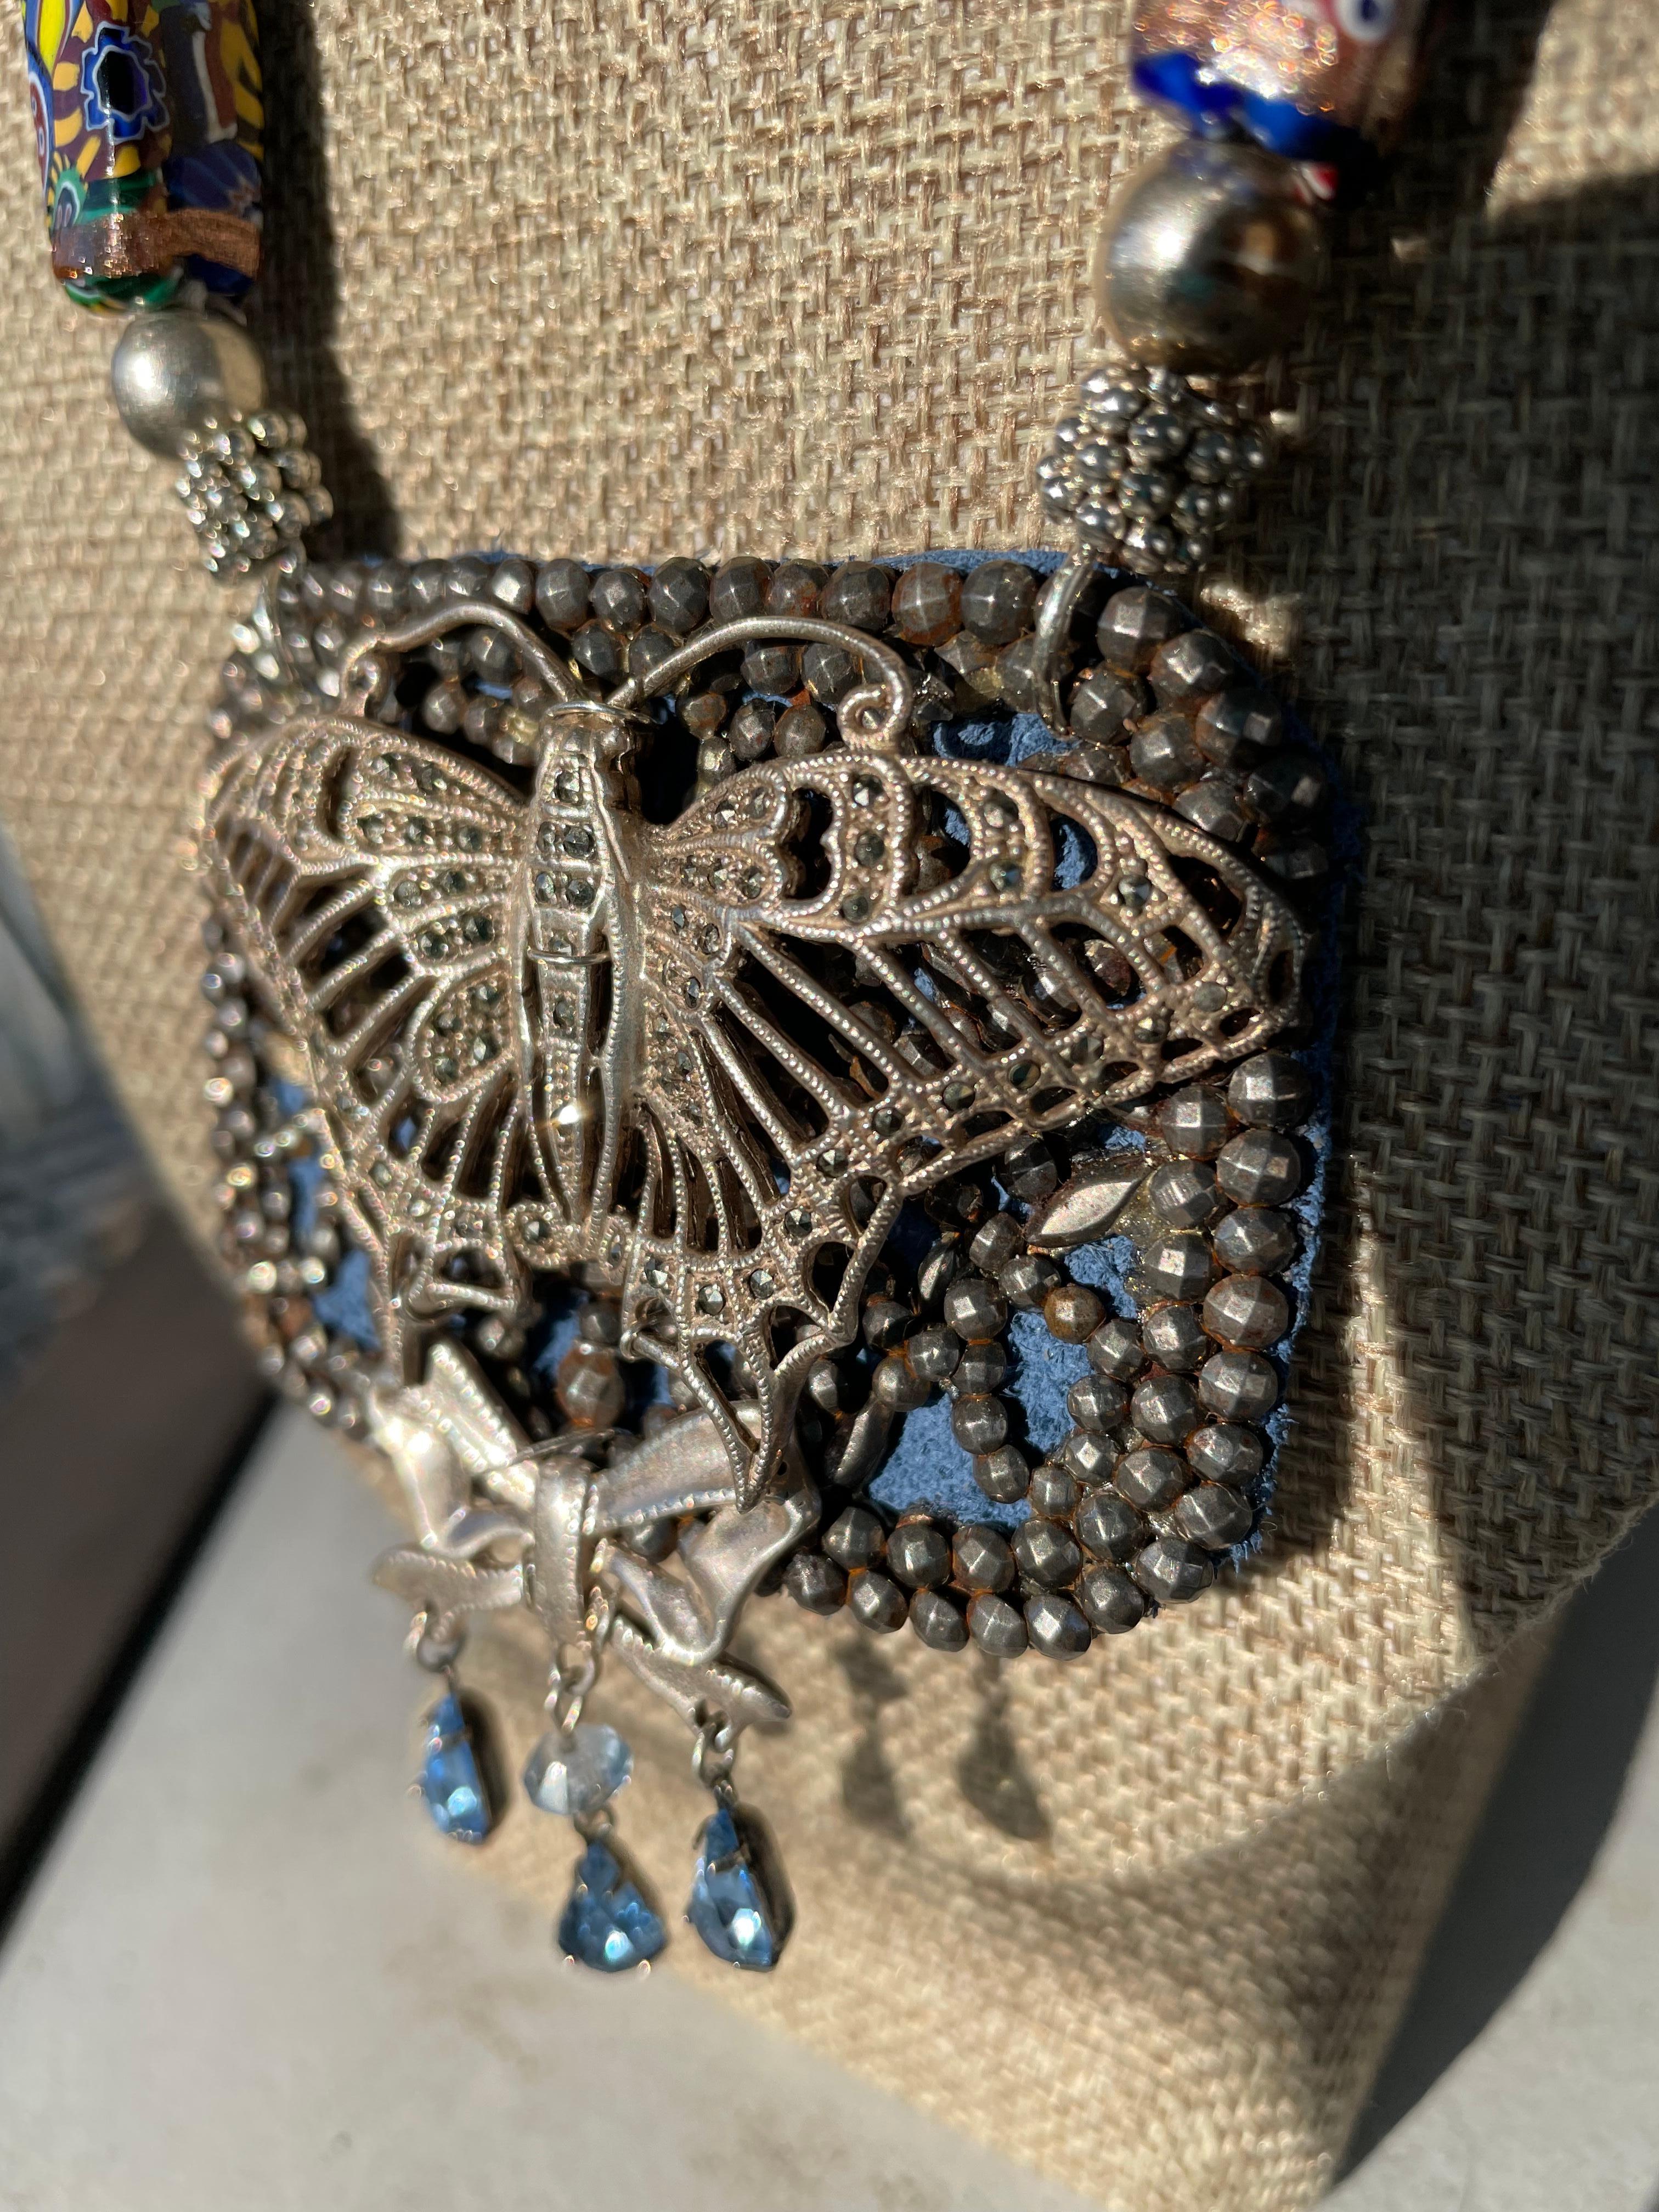 From Lorraine’s Bijoux an original,one of a kind,handmade,statement necklace with a vintage French metal buckle,vintage sterling and marcasite butterfly brooch. A vintage sterling bow brooch is part of the centerpiece pendant.Blue leather is used as